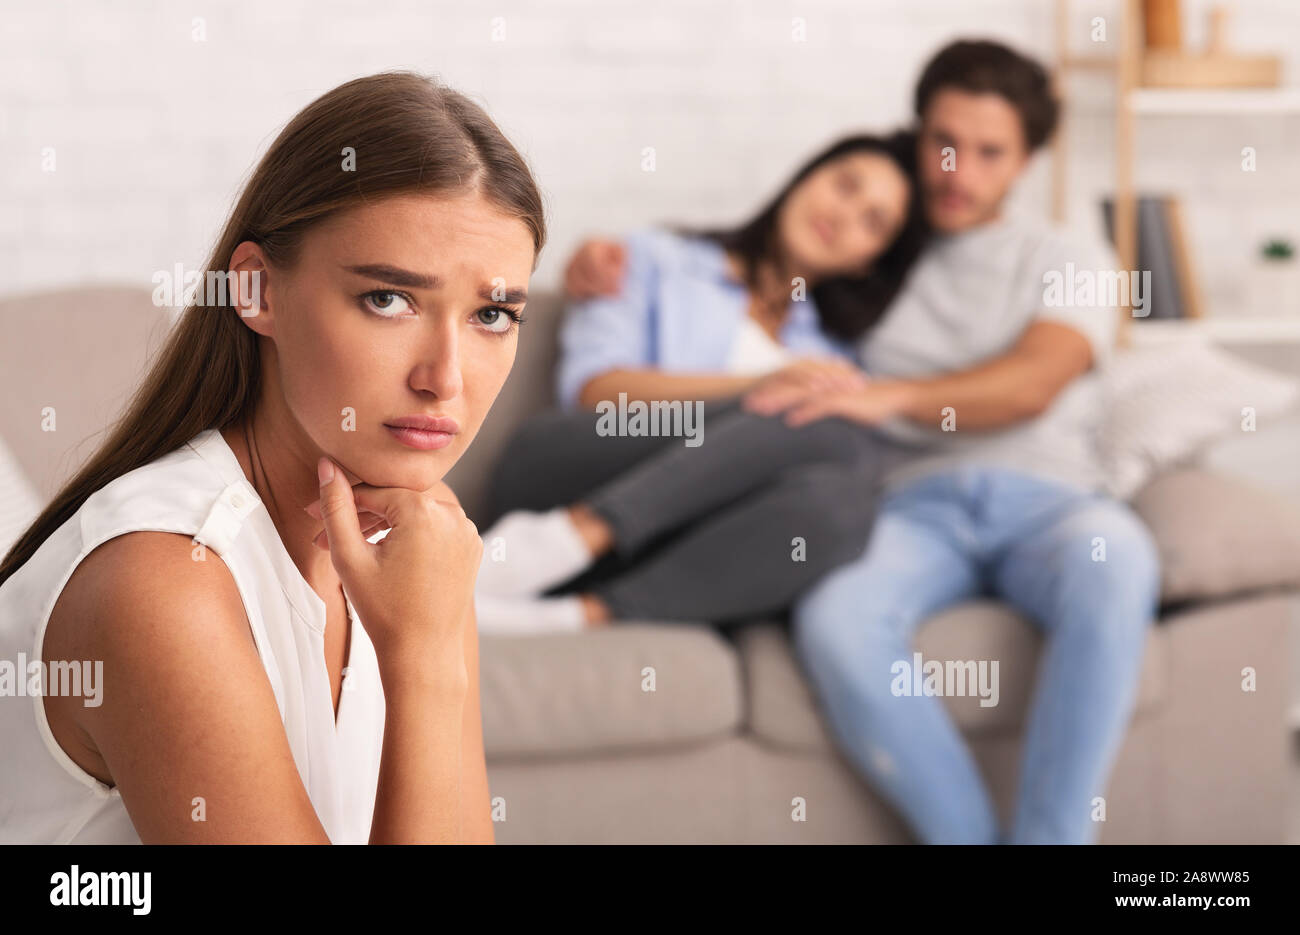 Unhappy Girl Looking At Camera While Her Friends Hugging Indoor Stock Photo